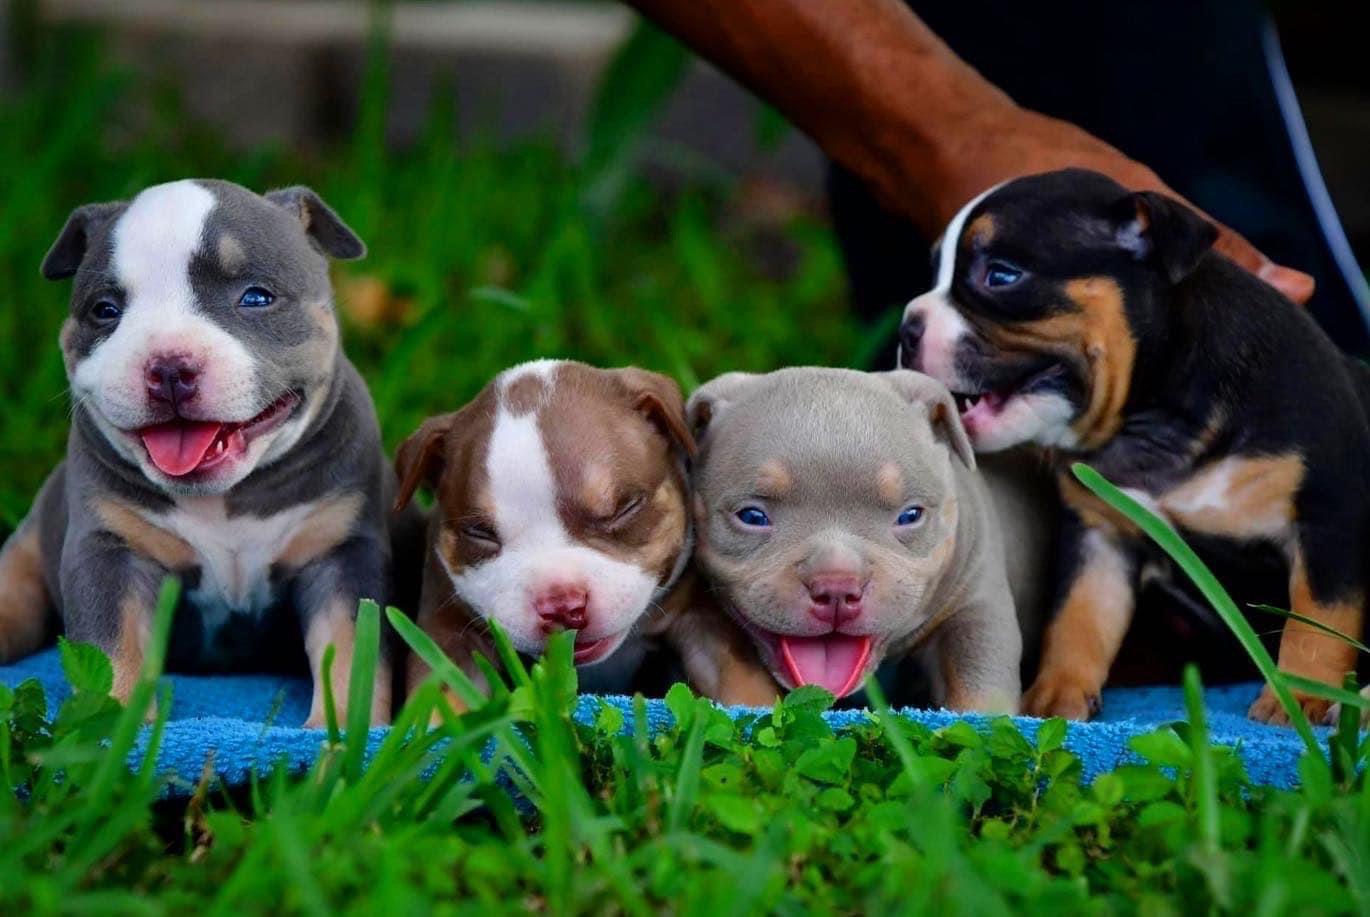 American Bully Puppies for Sale,  Extreme Pocket Bully, Venomline, American Bully Kennels, Best Pocket Bully Kennels, Pocket Bully Breeders, Pocket Bully Kennels, Top American Bully Breeders, Best Bully Bloodline